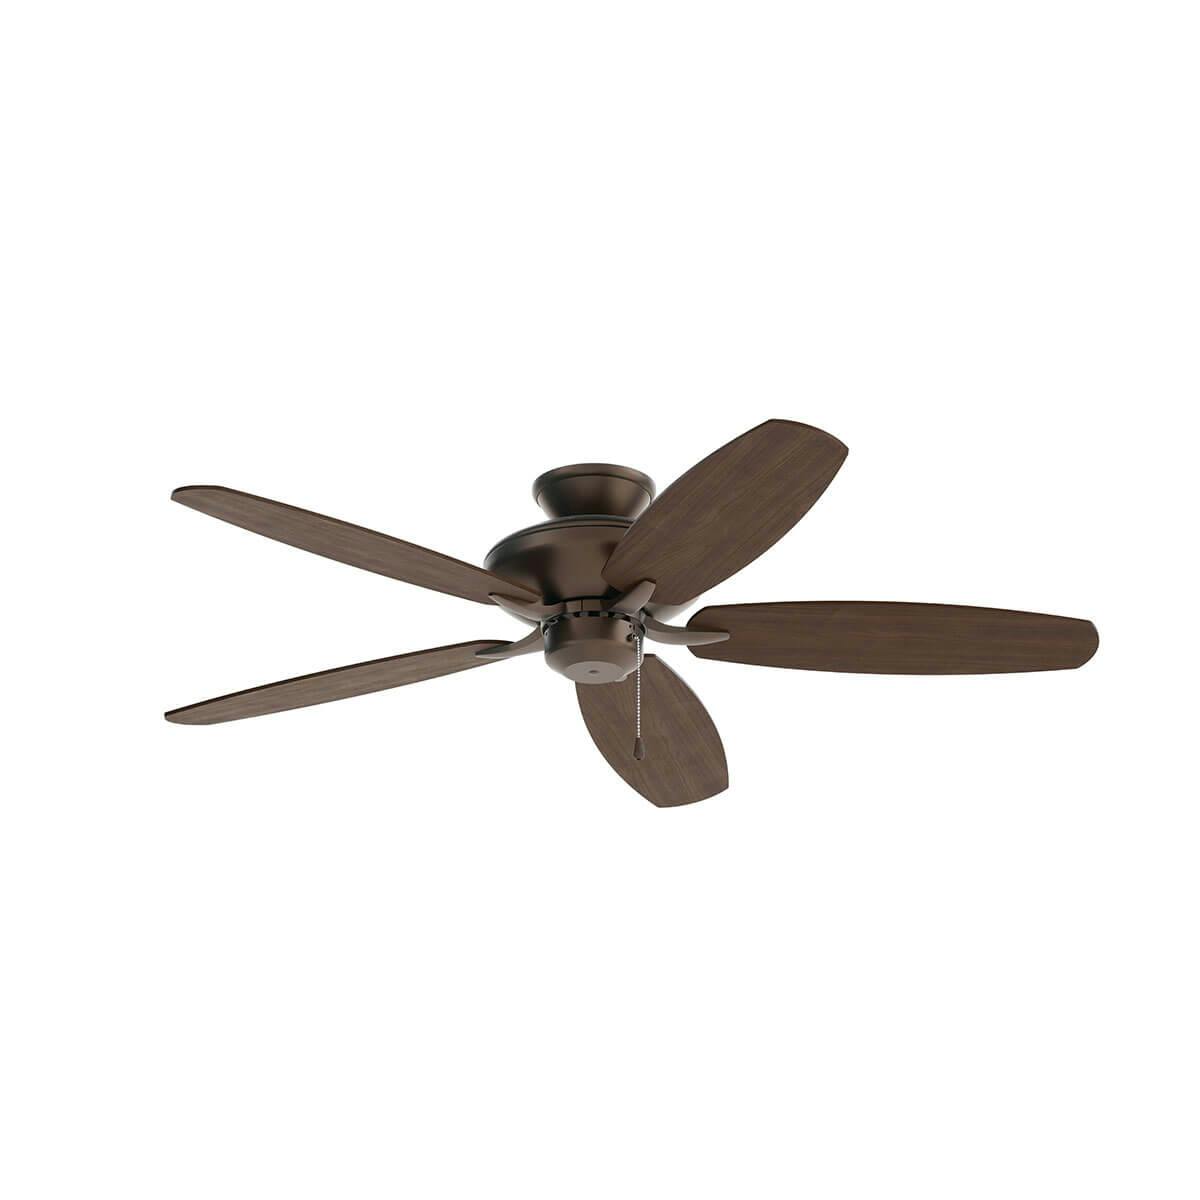 Product Image of ceiling fan 330165SNB